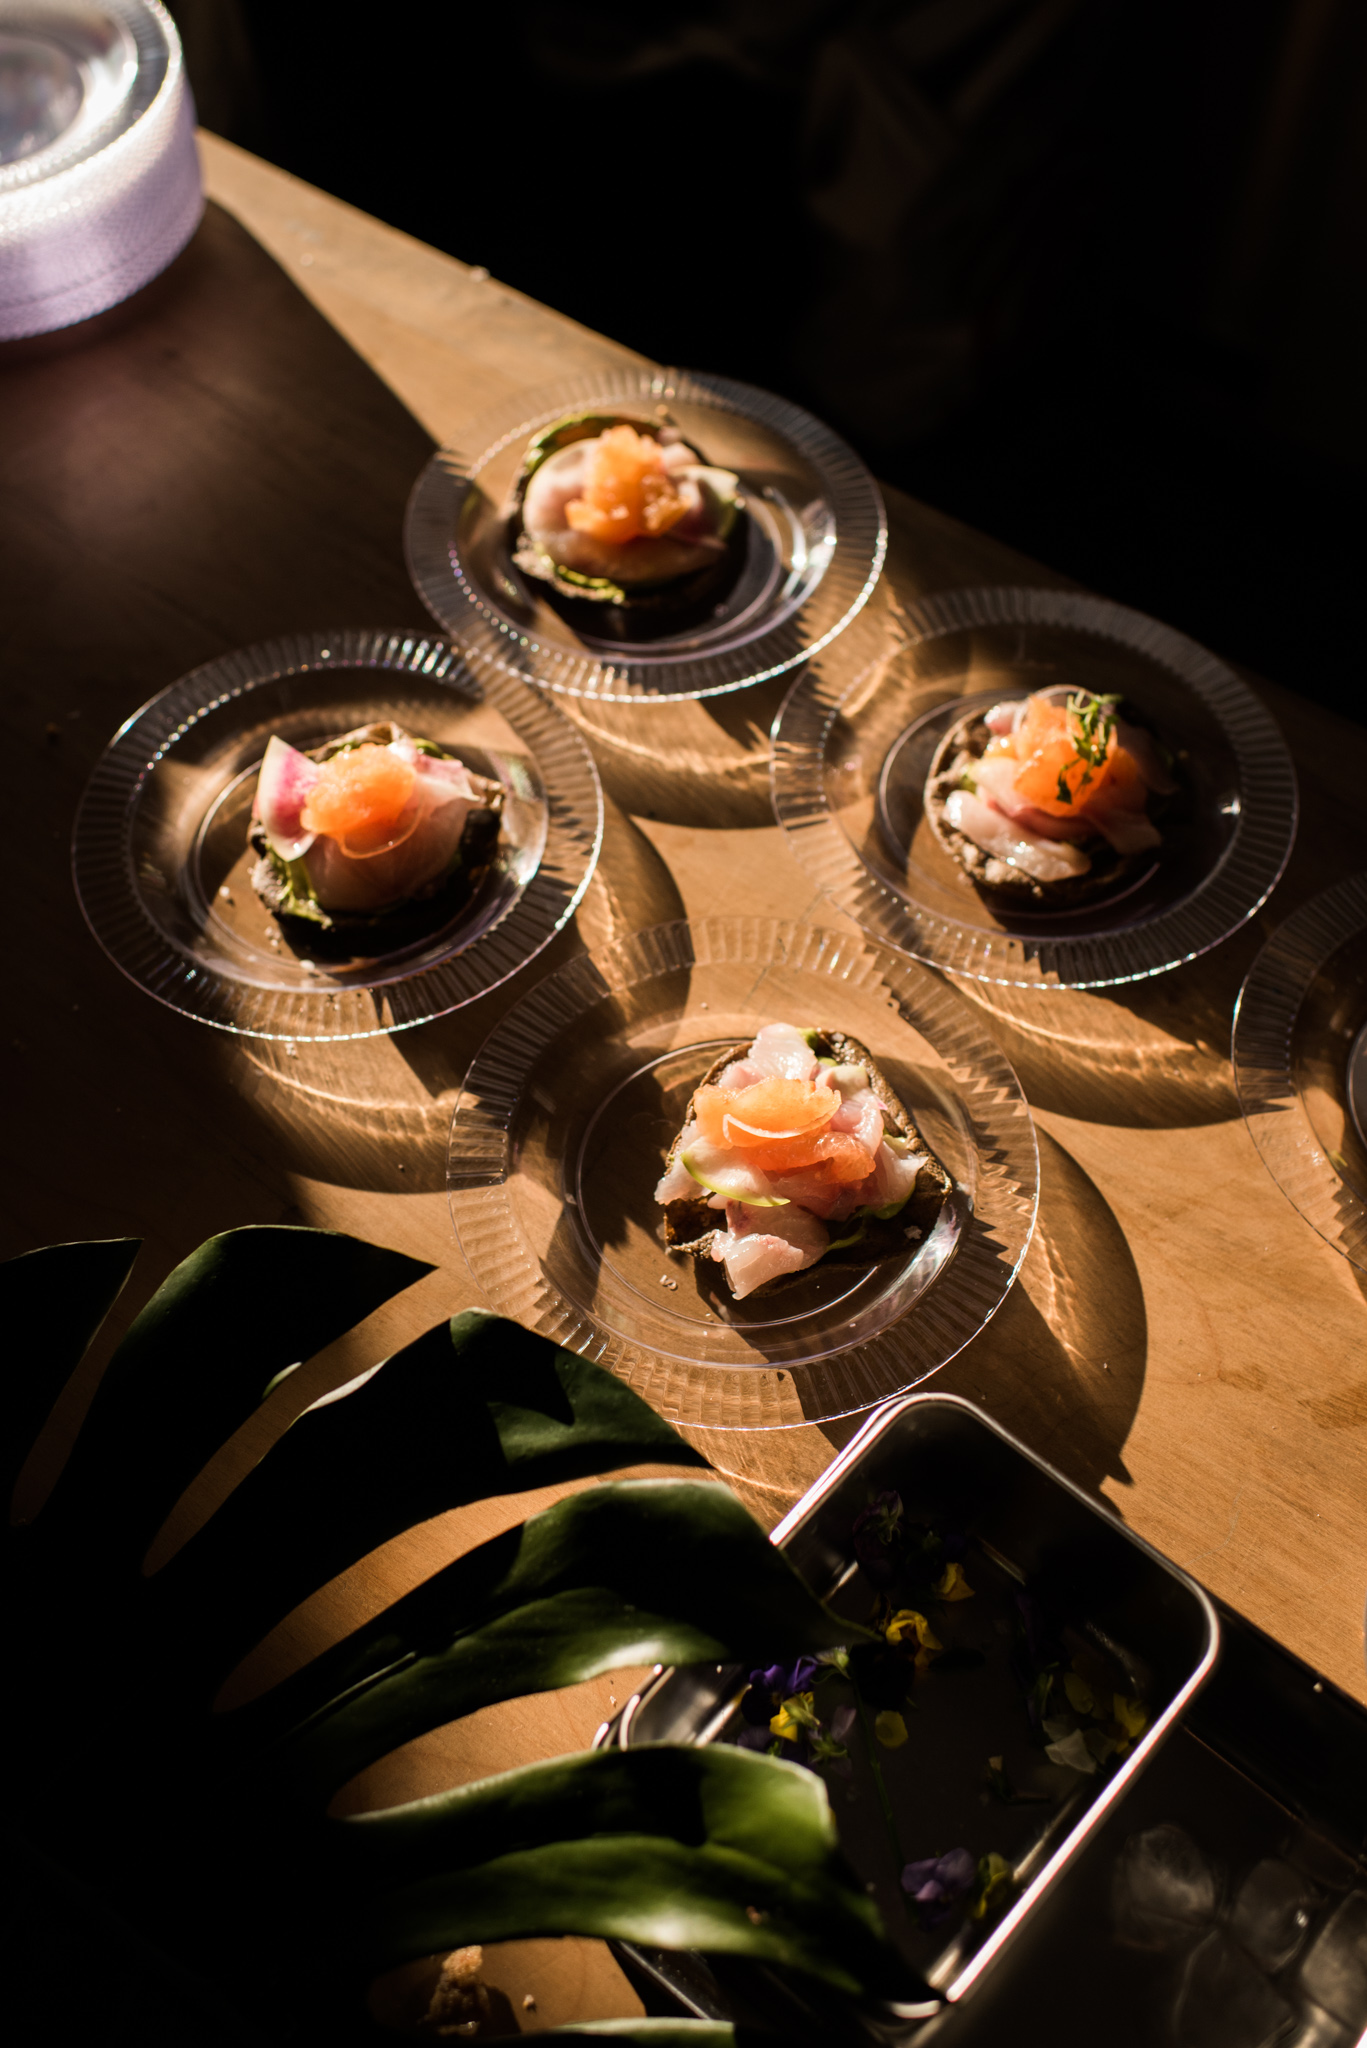 A signature dish is plated for the event